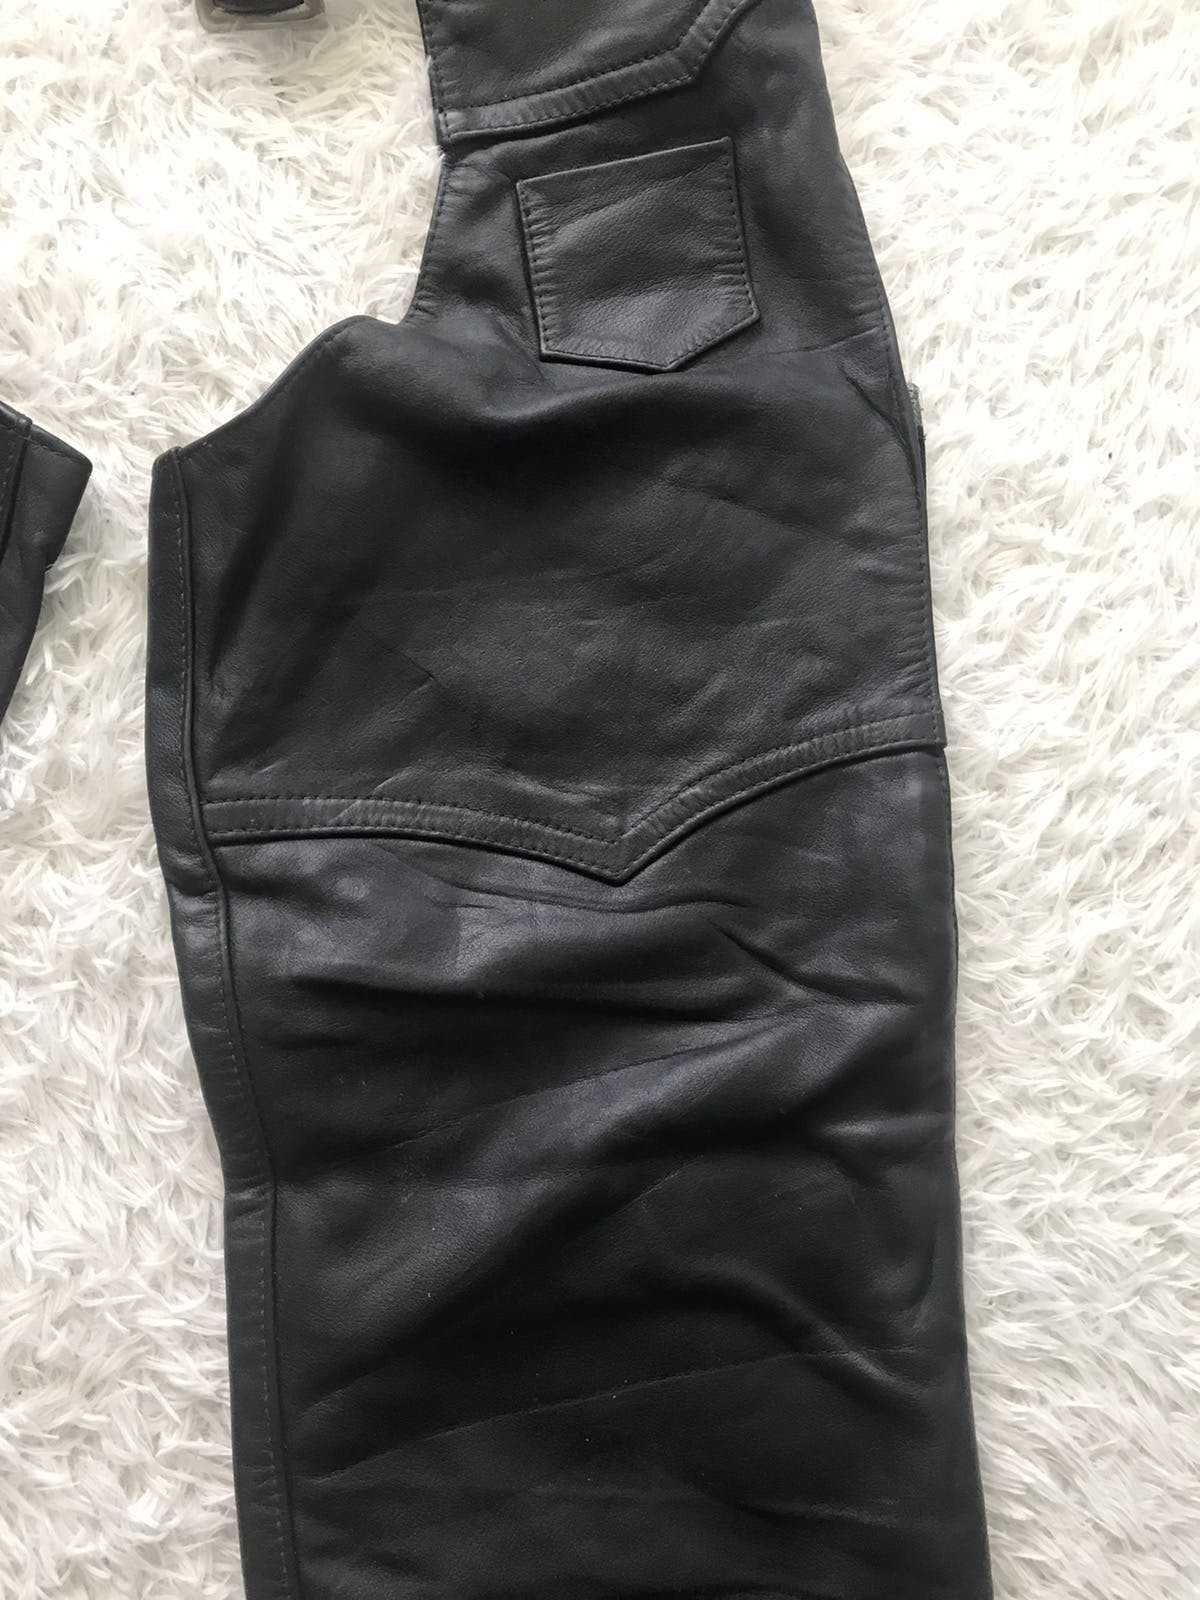 Schott NYC Motorcycle Leather Chaps Pant - 5